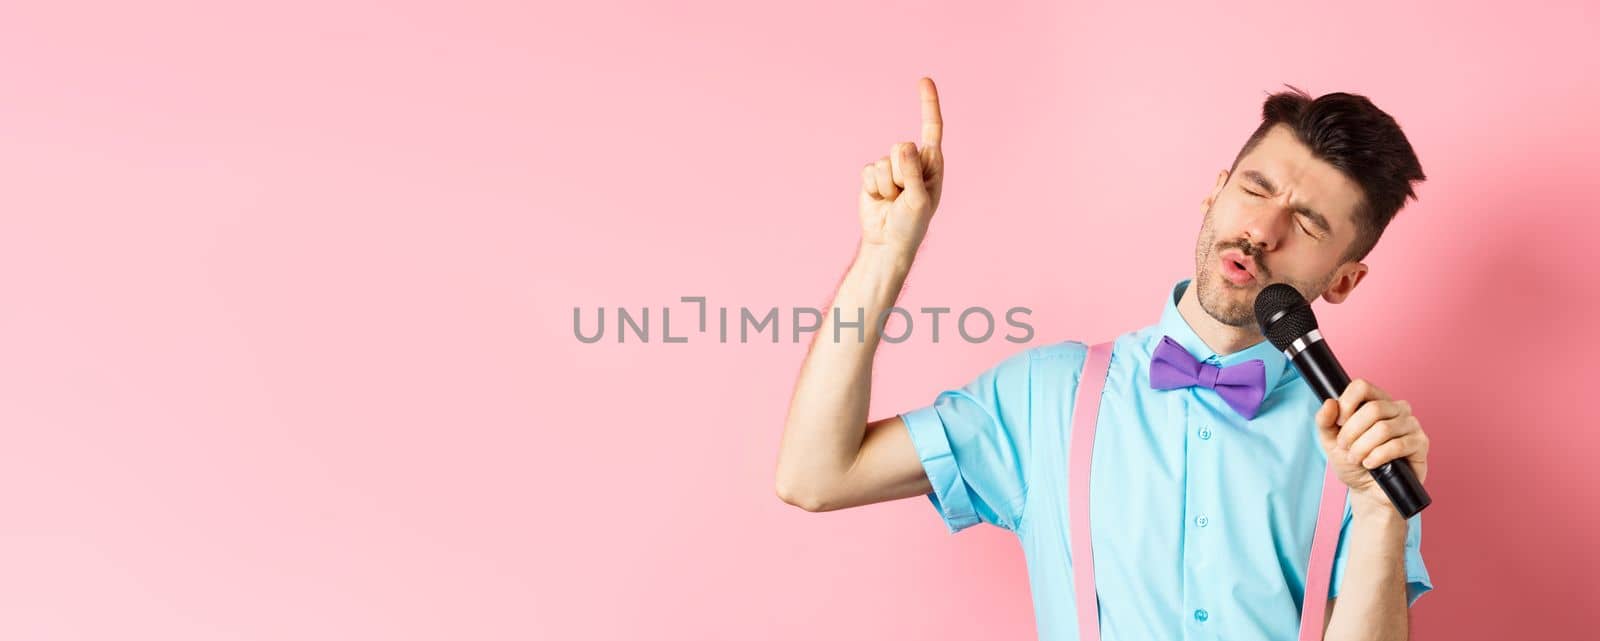 Party and festive events concept. Funny guy singing in microphone, raising finger up as reaching high note in song, standing on pink background.